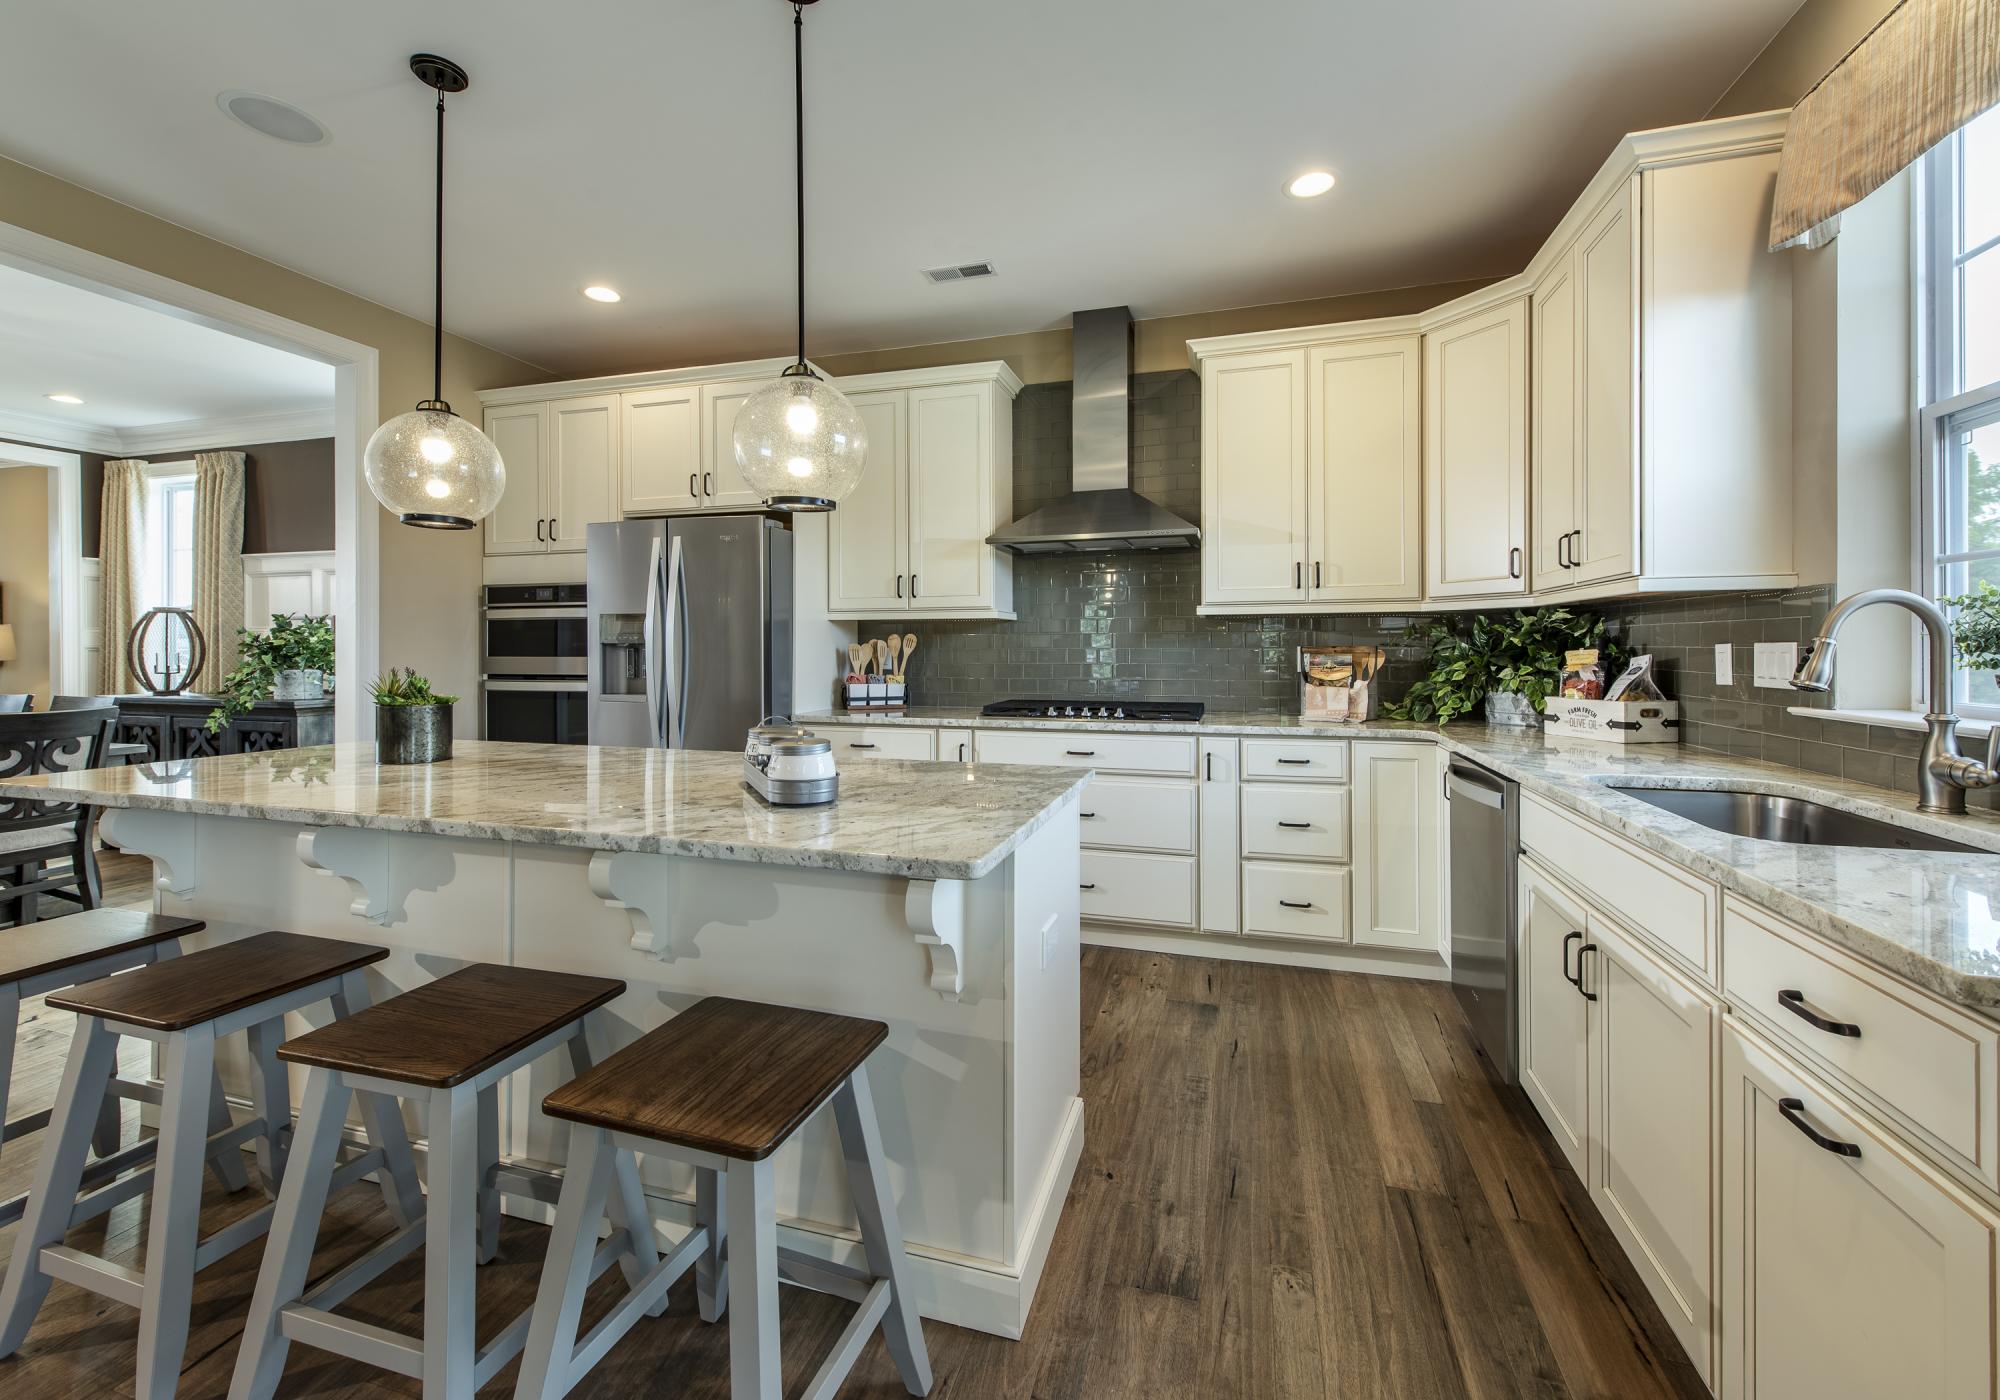 Your New Home is Ready This Winter | DeLuca Homes